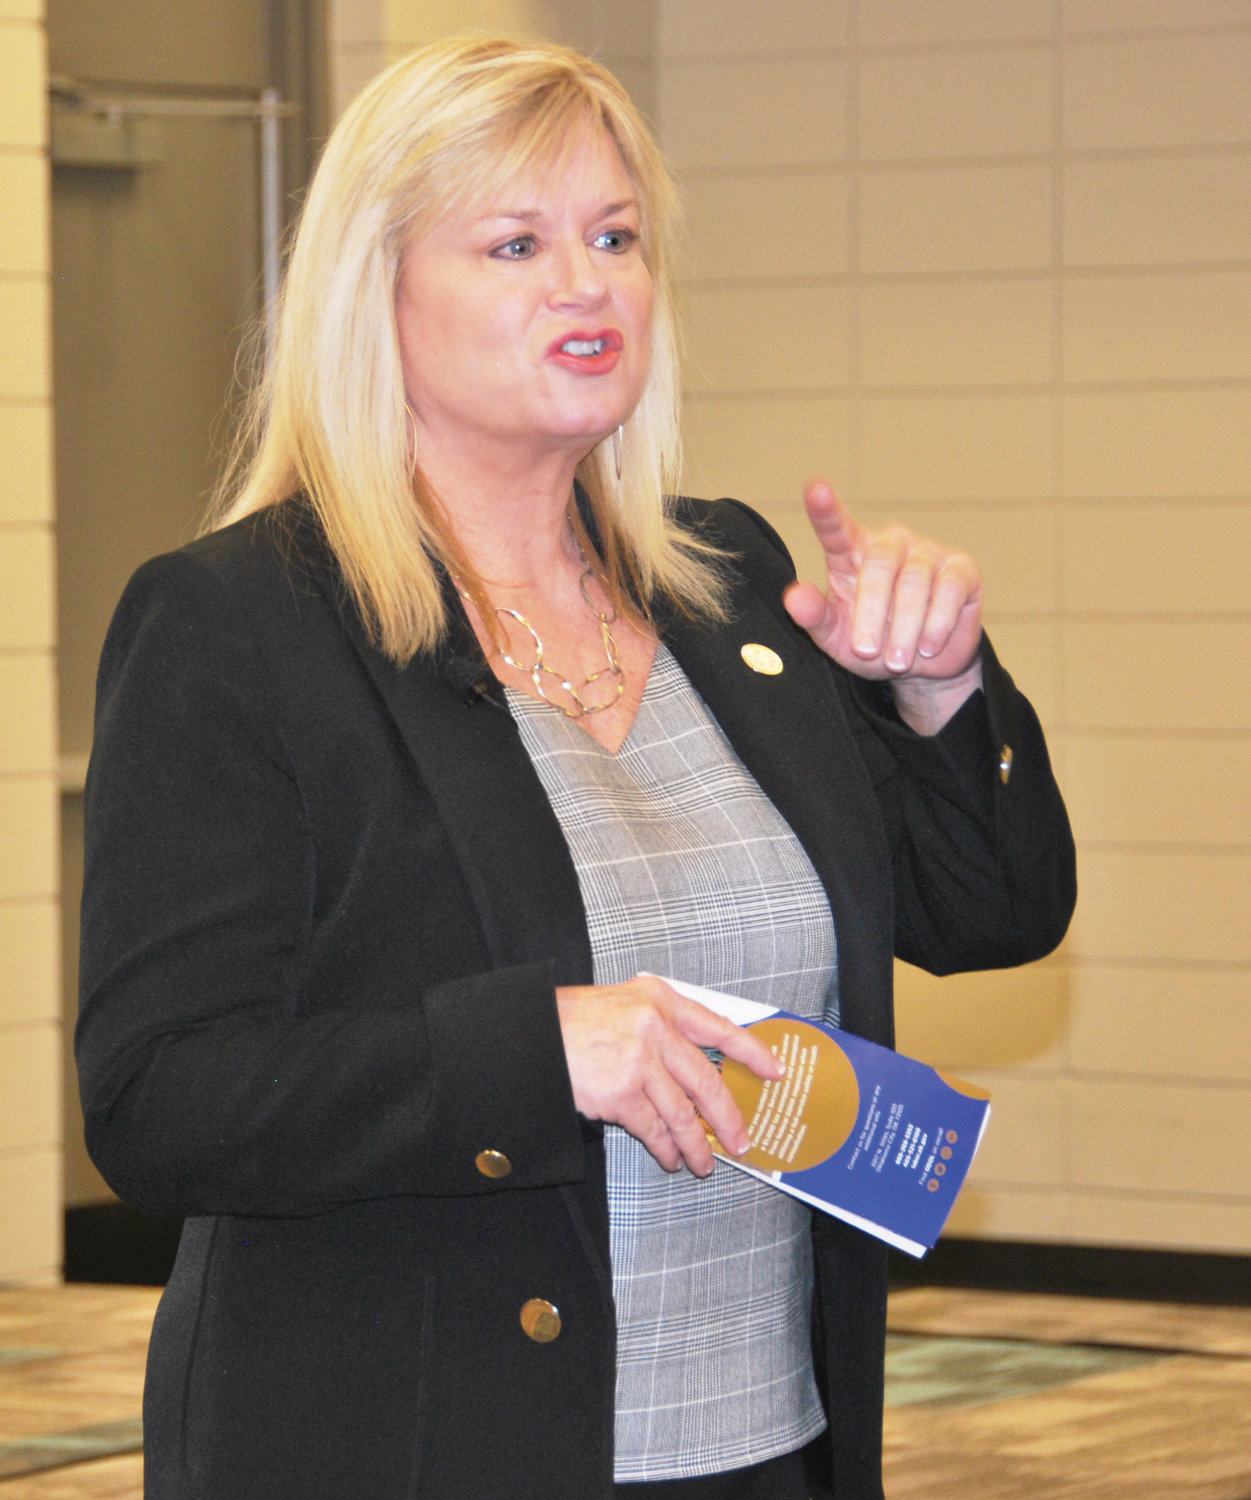 Leslie Osborn was the keynote speaker at last Friday’s monthly Heart of Oklahoma Chamber or Commerce Luncheon at Mid-America Technology Center.